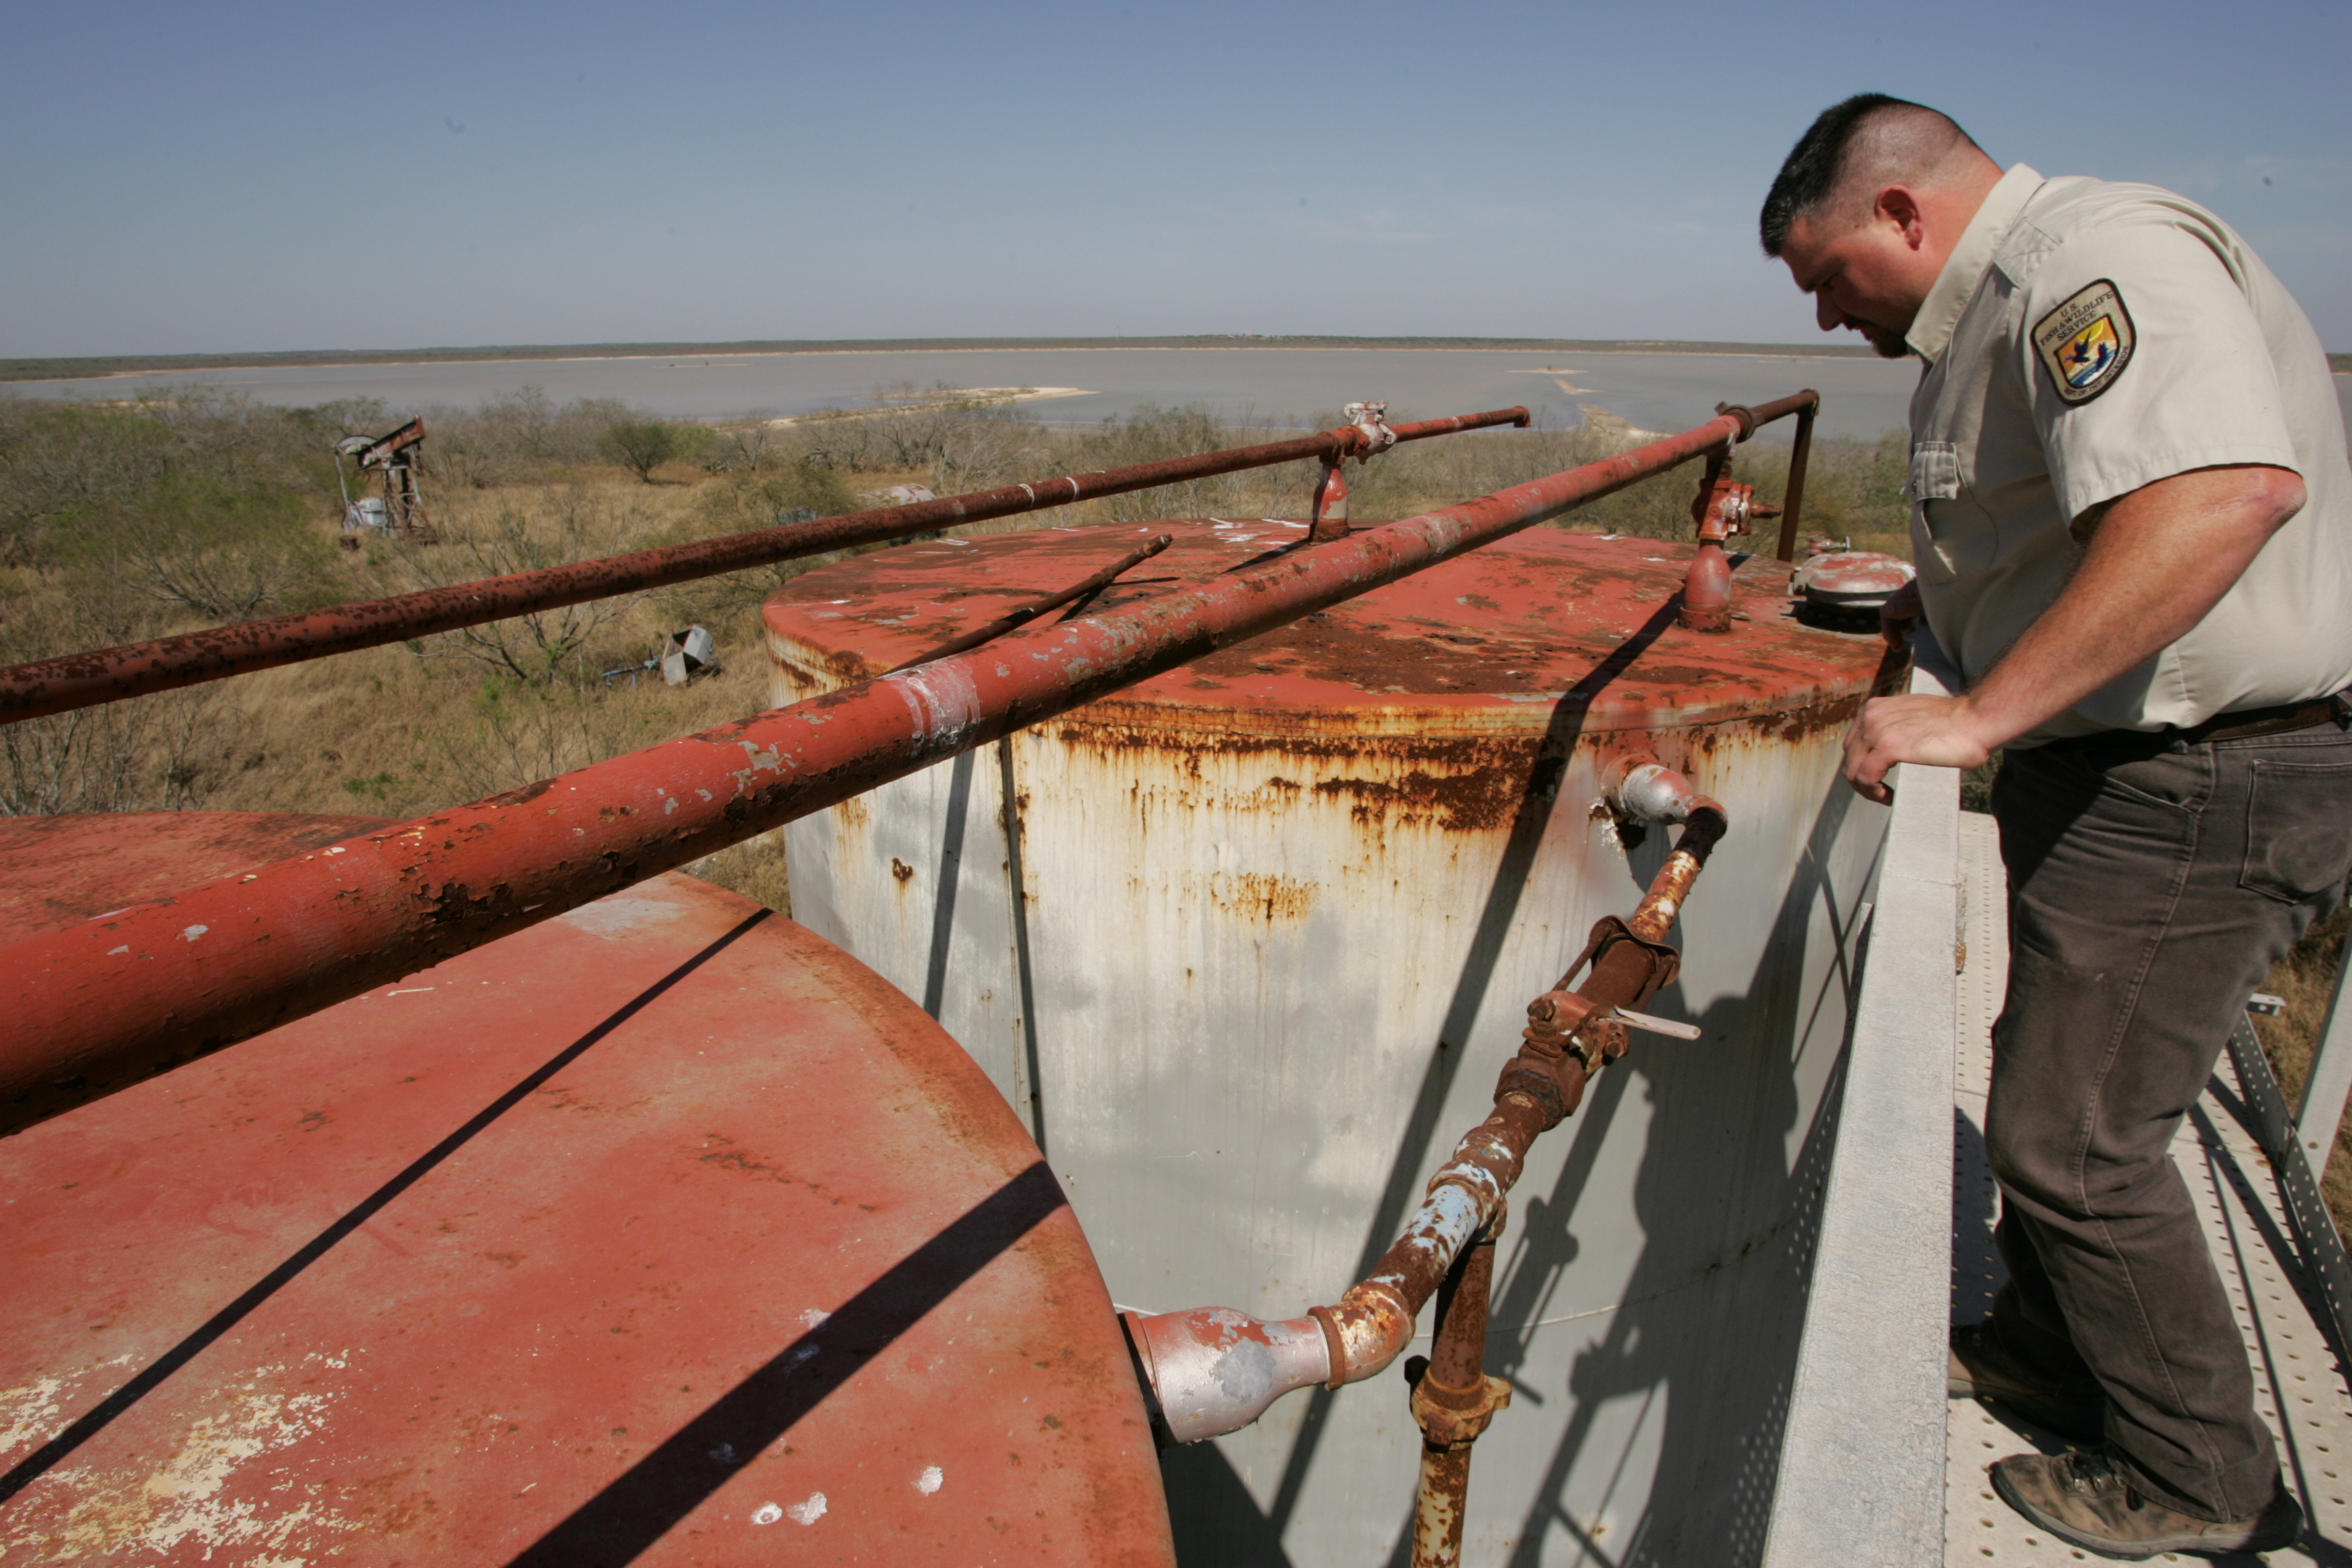 A man in a Fish and Wildlife Service uniform looks at rusting oil tanks that sit on land.